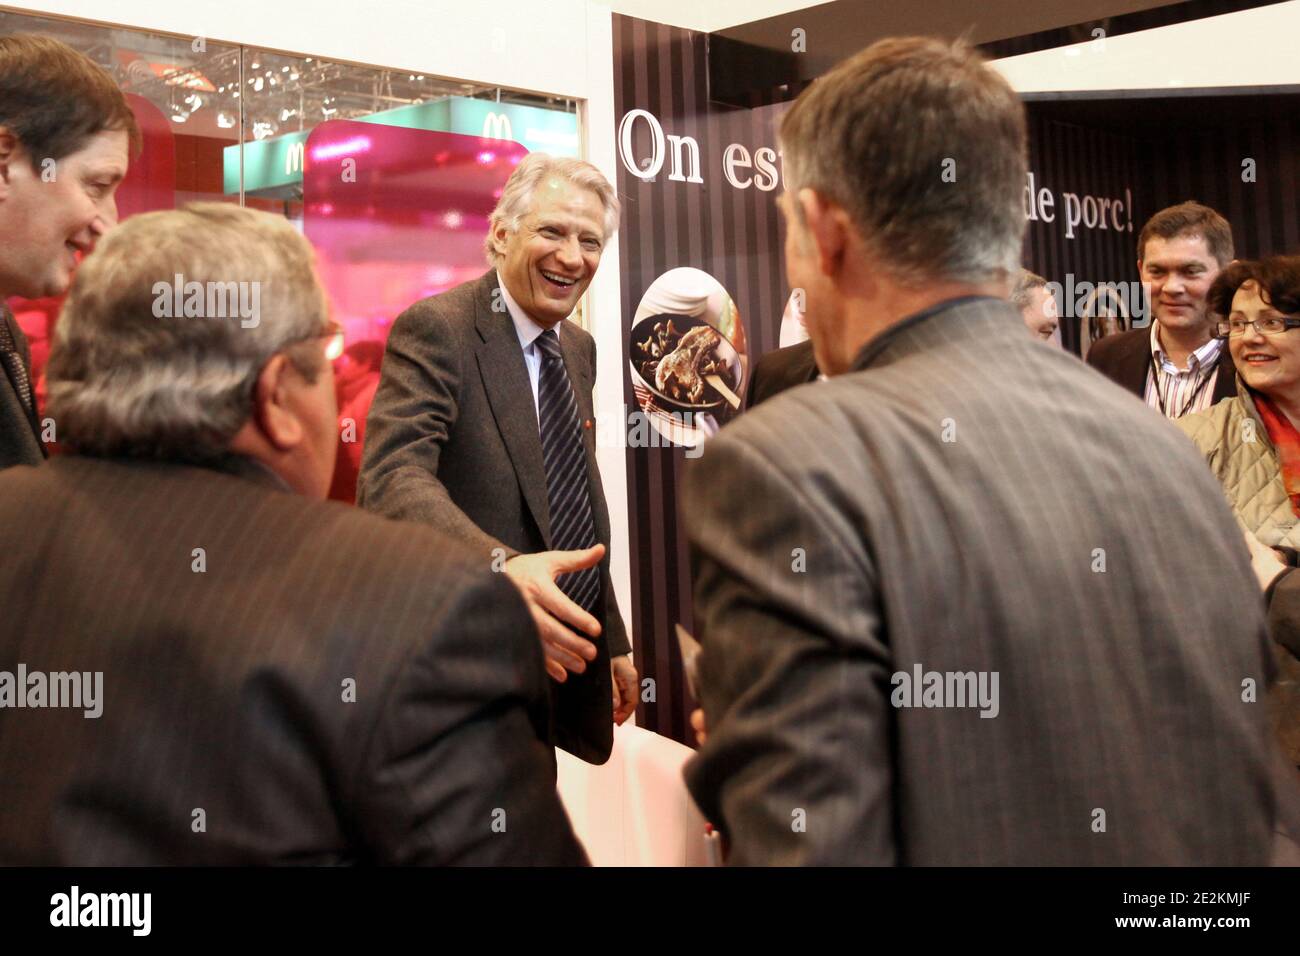 Exclusive-Former French Prime Minister and Foreign Affairs Minister, founder and Chairman of Republique Solidaire RS (United Republic) political movement, Dominique de Villepin participates to a meeting with president of Porcine national federation (FNP), Jean-Michel Serres during his visit at the International Agricultural Fair held at the Porte de Versailles, in Paris, France, on February 23, 2011. Photo by Stephane Lemouton/ABACAPRESS.COM Stock Photo